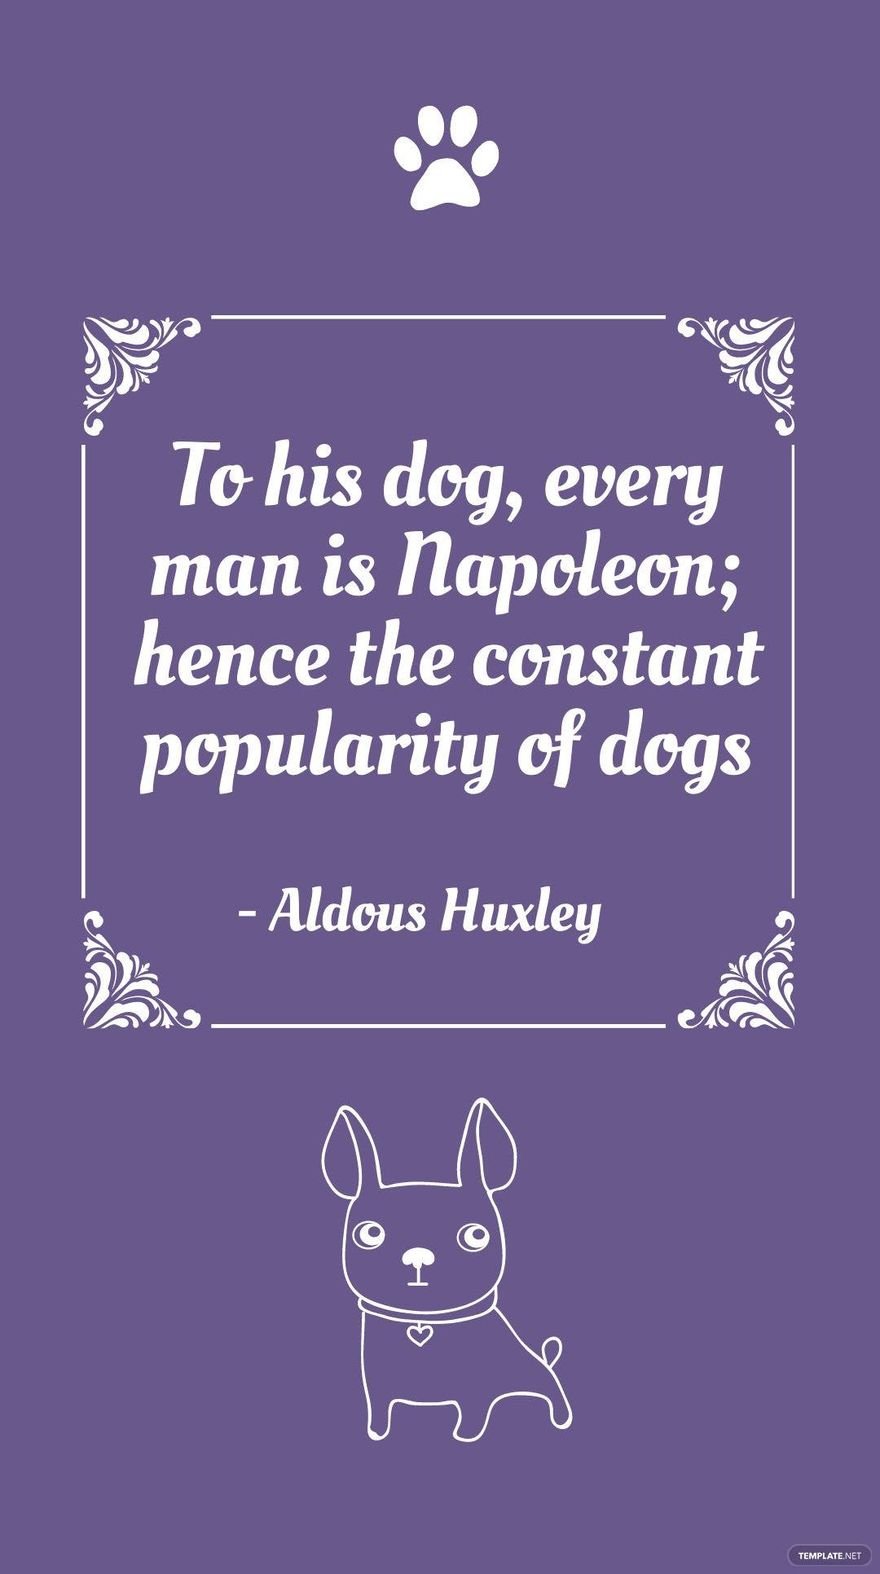 Free Aldous Huxley - To his dog, every man is Napoleon; hence the constant popularity of dogs in JPG